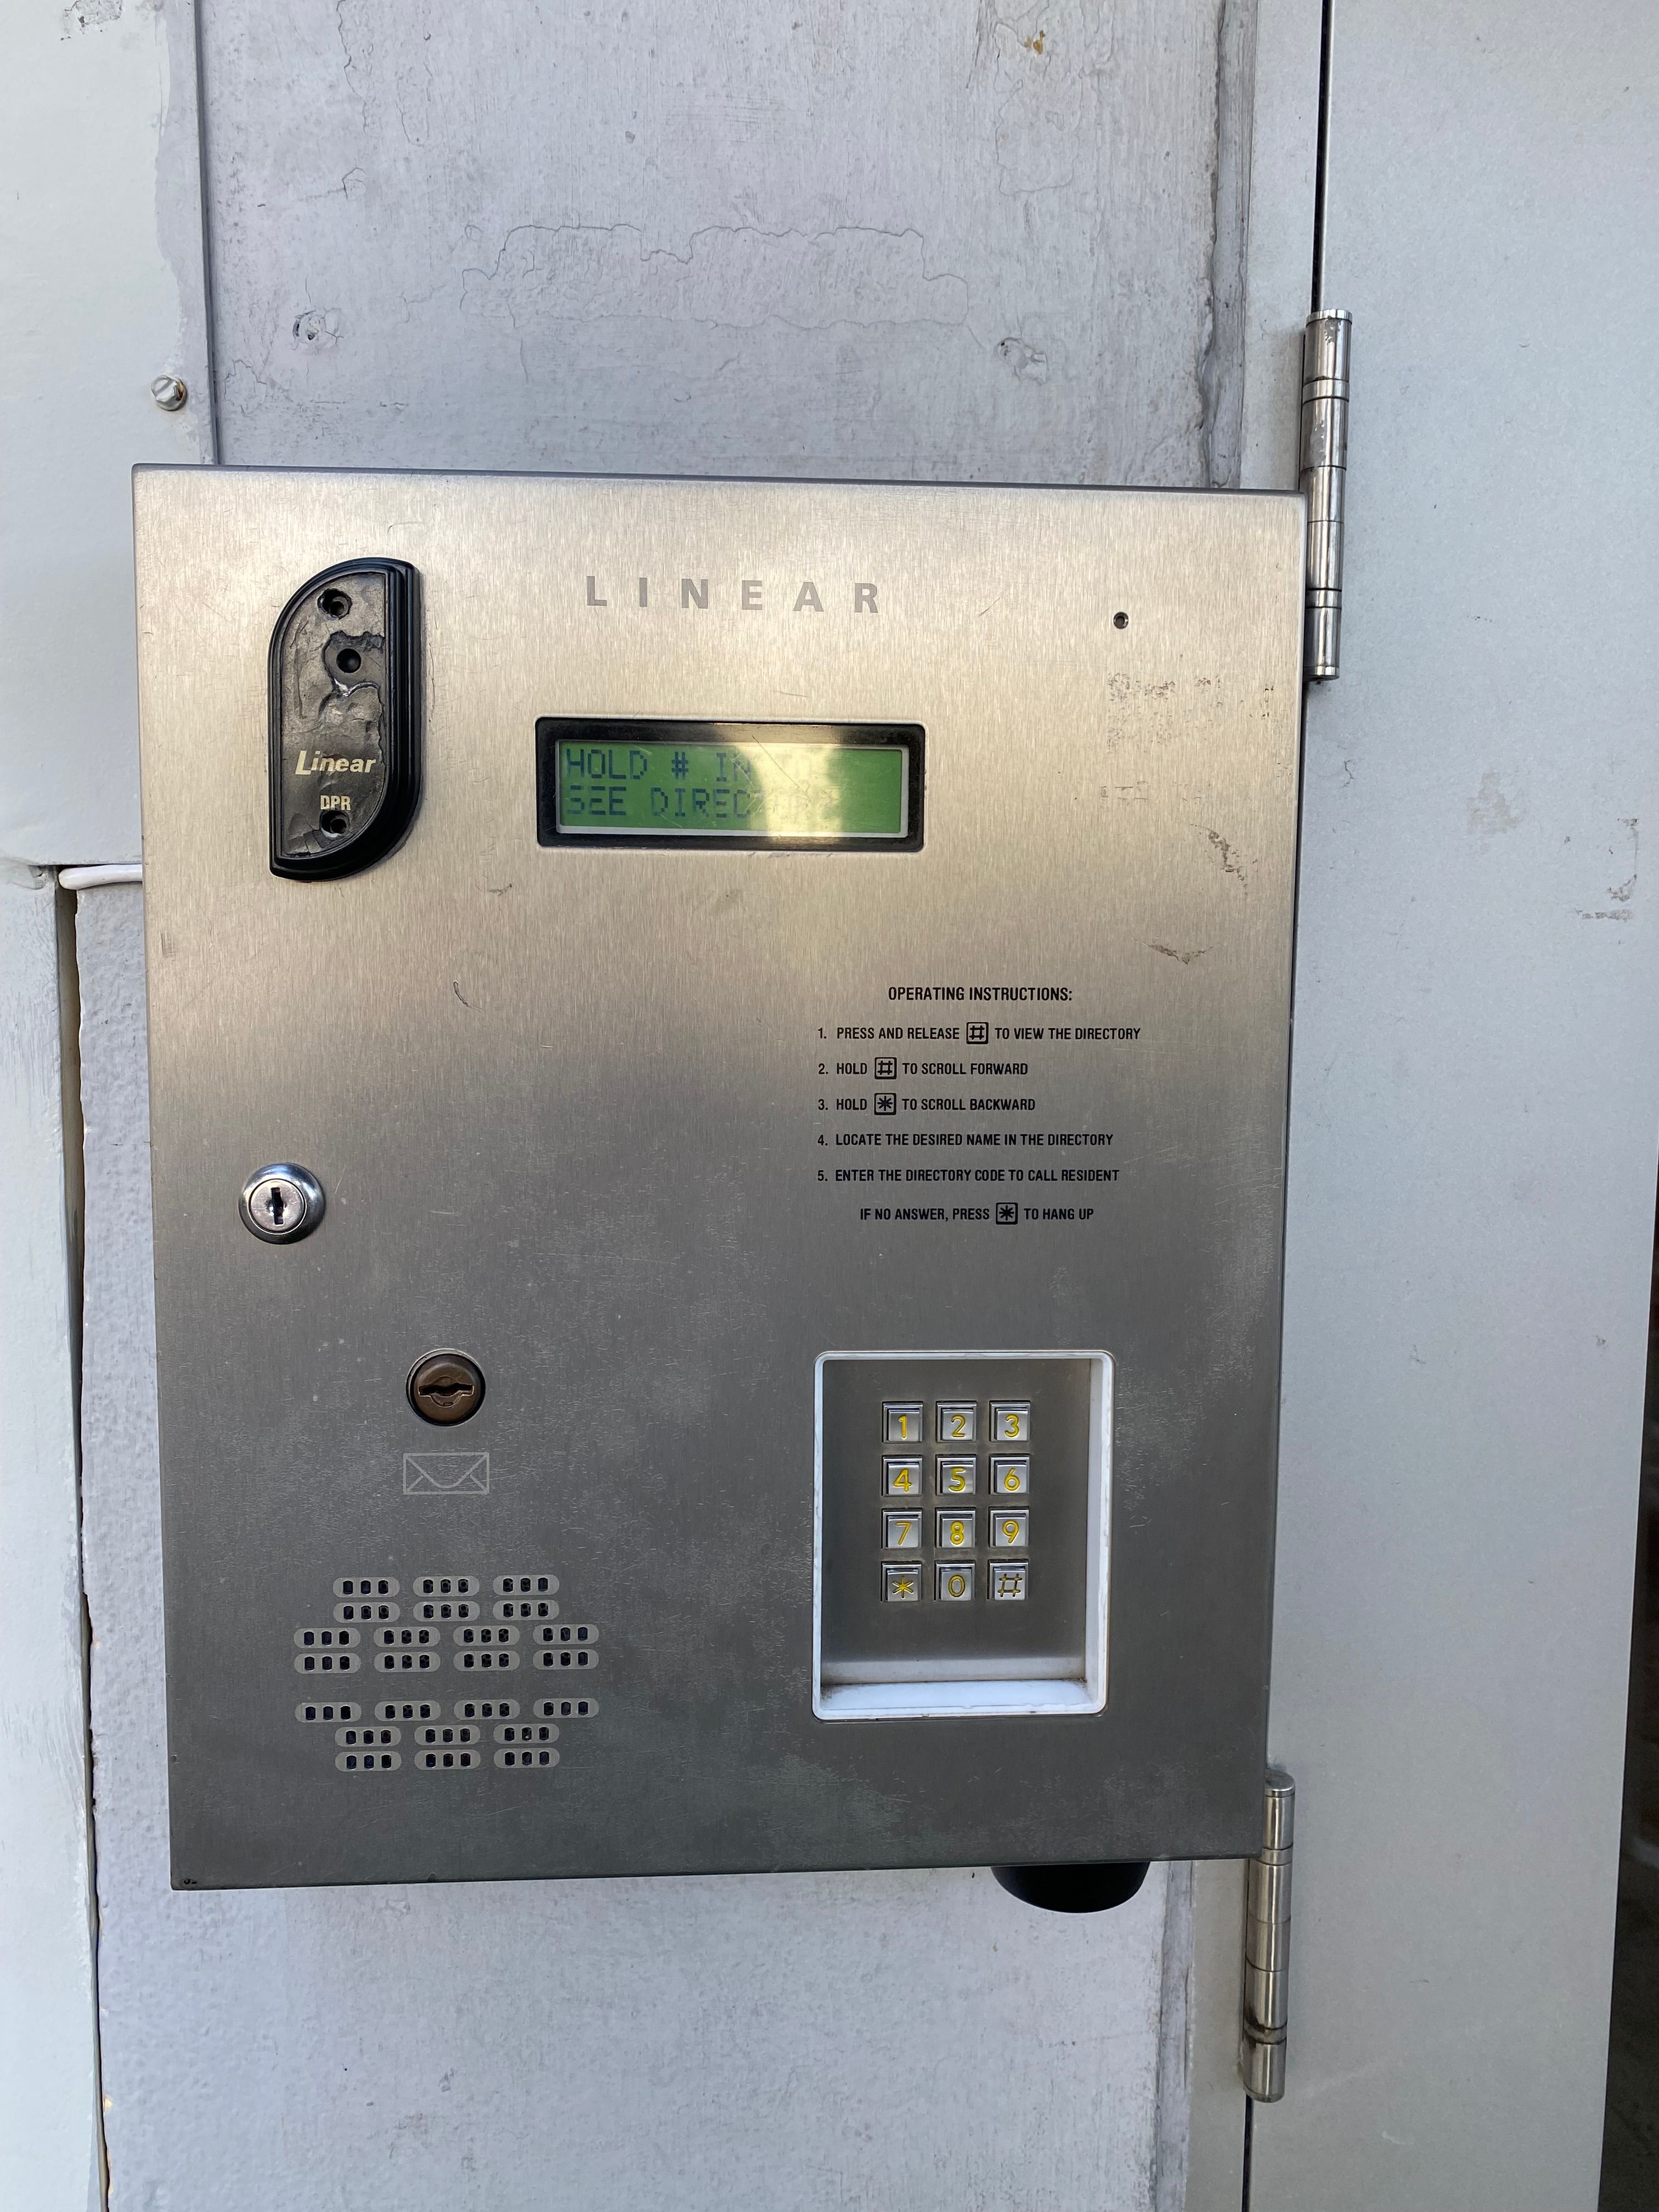 Picture of the keybad at our front door. It has a black receiver on the top left, a small screen just to the right of that, and a keypad on the bottom right. The whole keypad is made out of some stainless-steel looking metal.